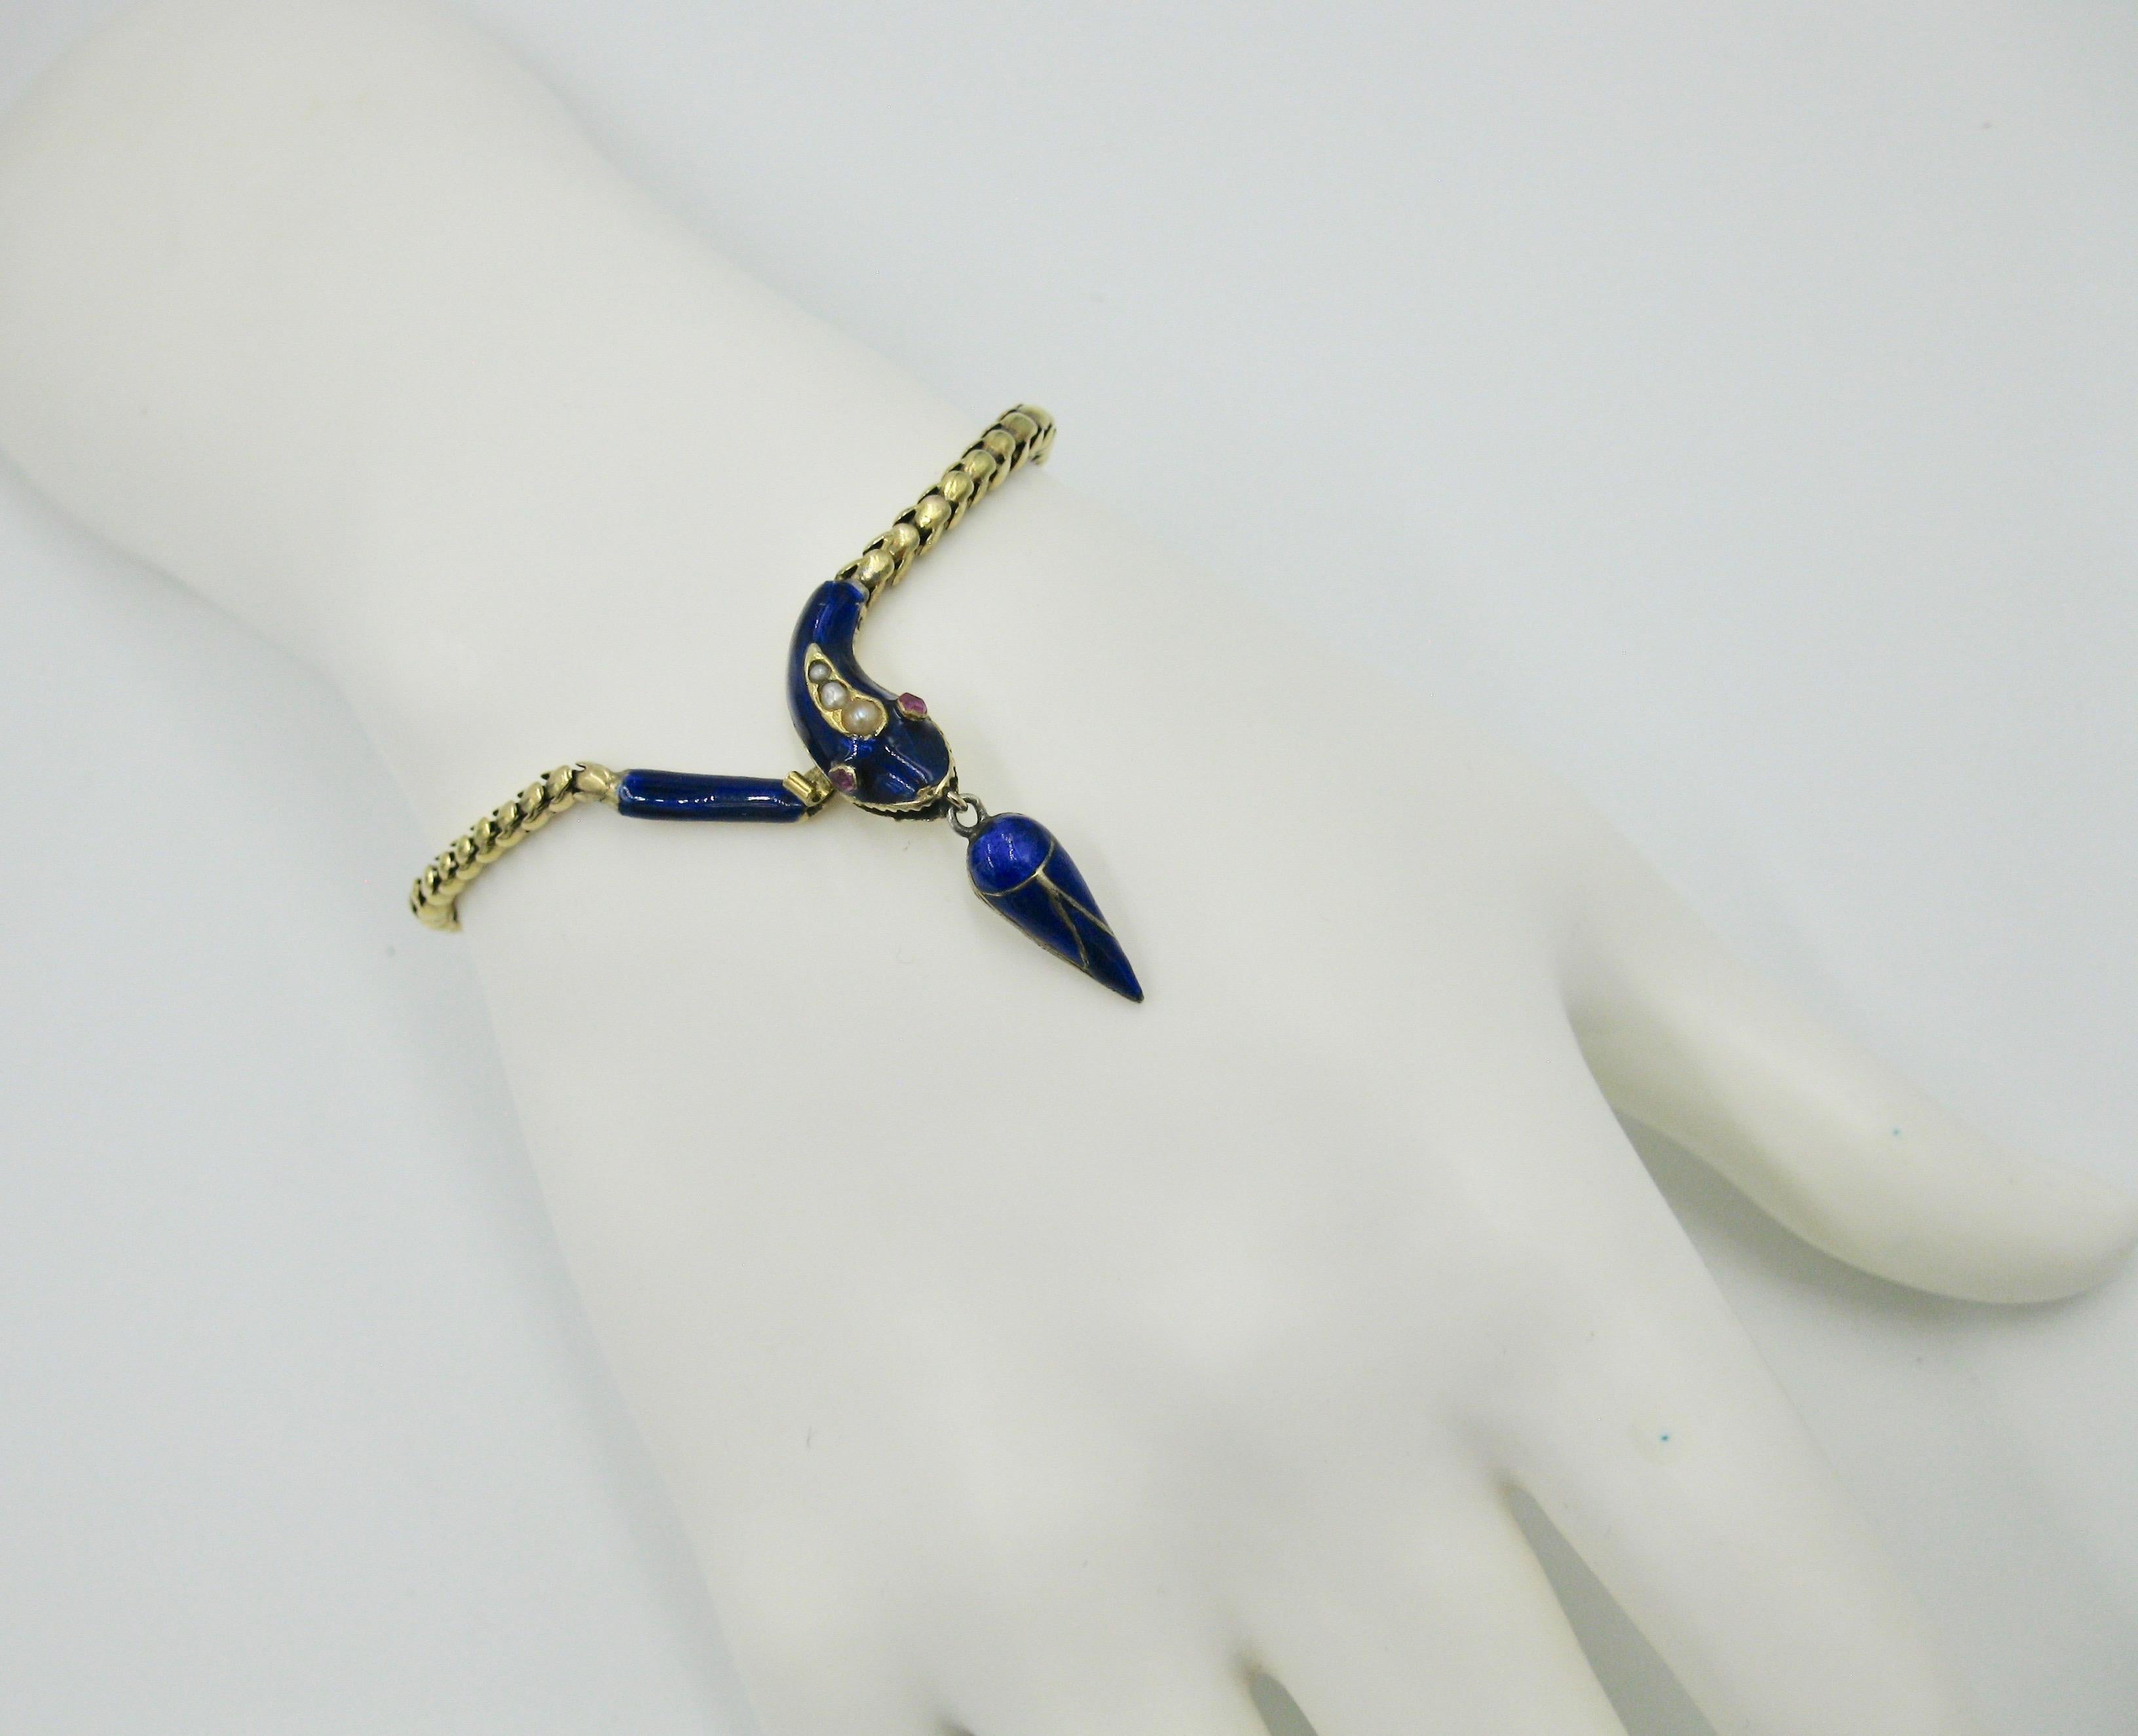 This is a rare and wonderful antique Victorian Snake Bracelet.  The snake bracelet dates to circa 1840.  The snake head is set with faceted round Rubies and Pearls.  The snake's head, tail and cone shaped pendant are adorned with vivid royal blue